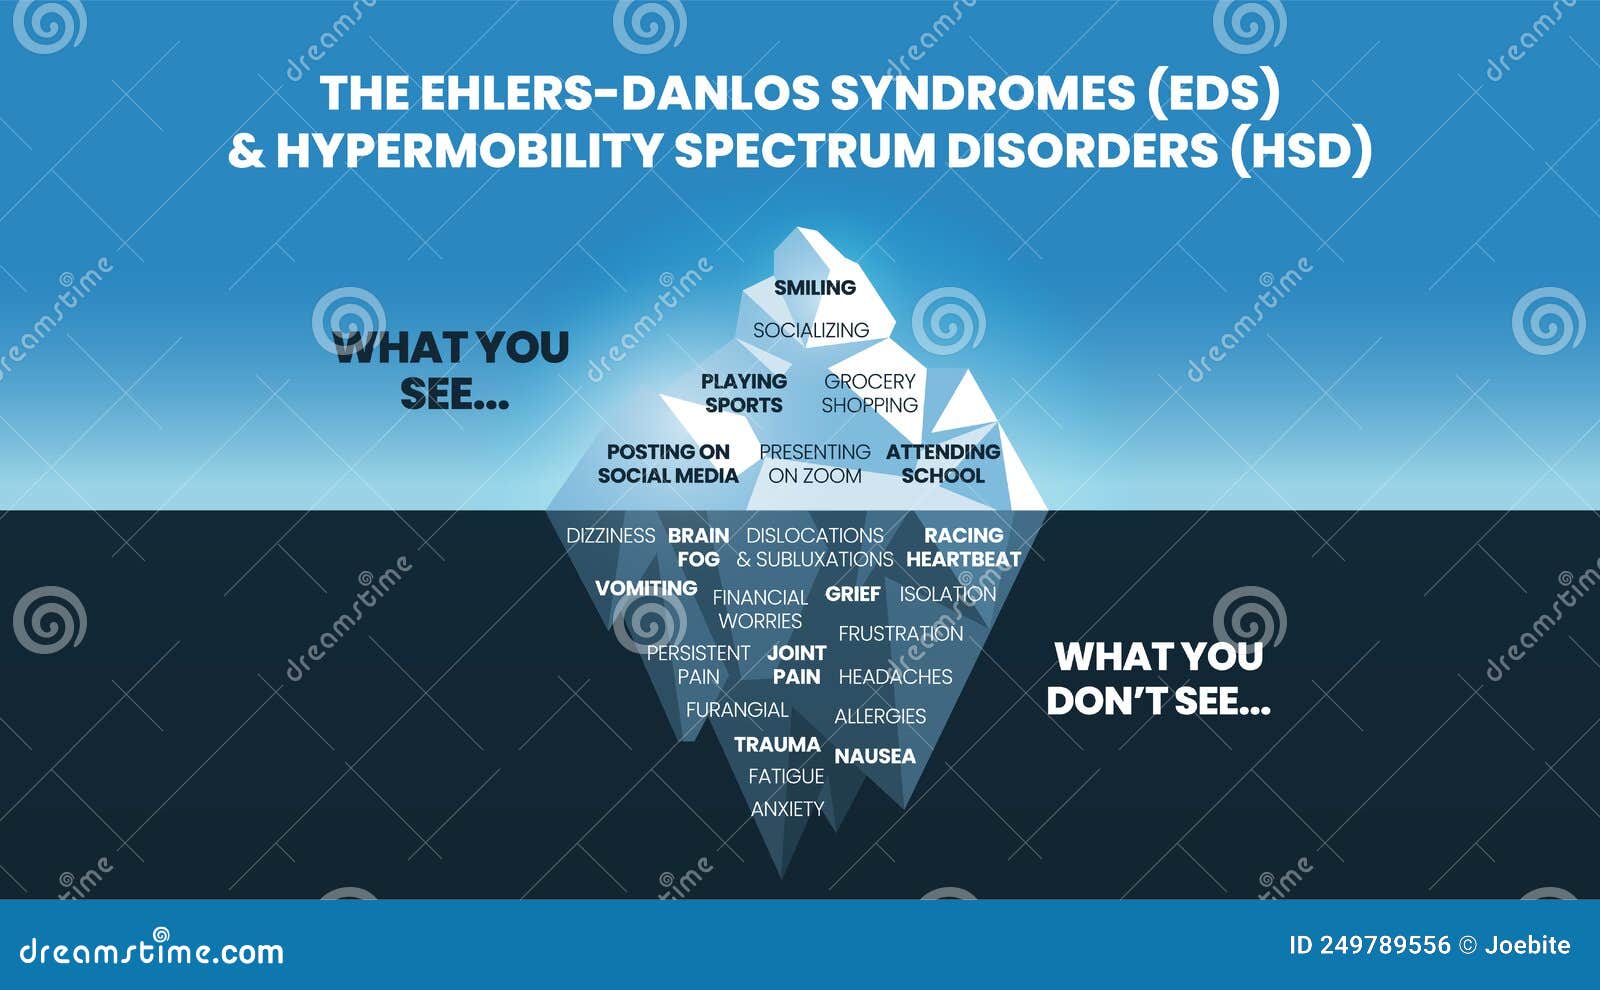 the iceberg model of ehlers-danlos syndromes eds and hypermobility spectrum disorder hds concept has the surface symptom can